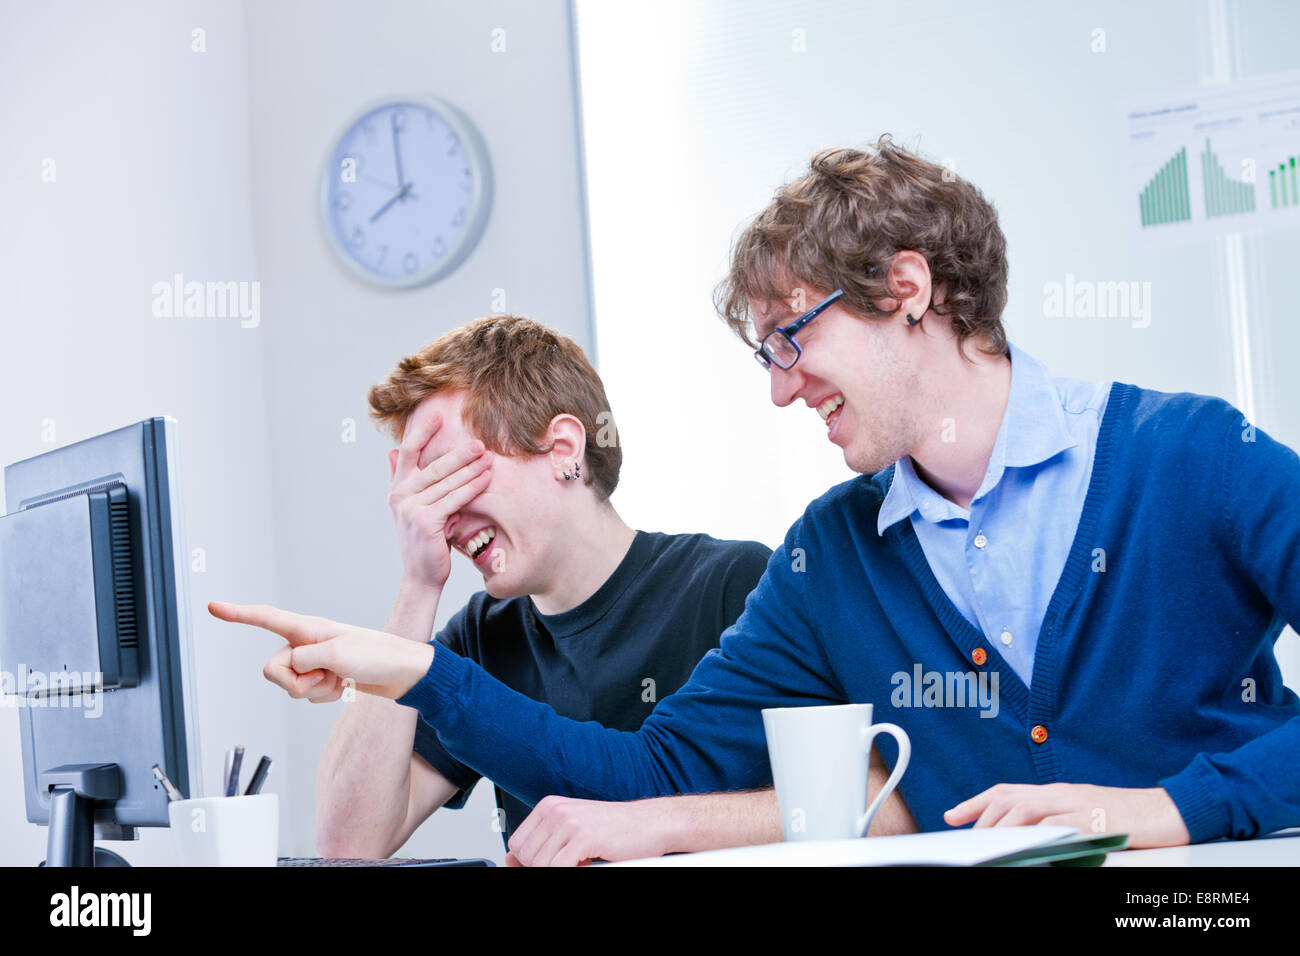 a couple of two young office workers laugh at what is happening on the screen Stock Photo